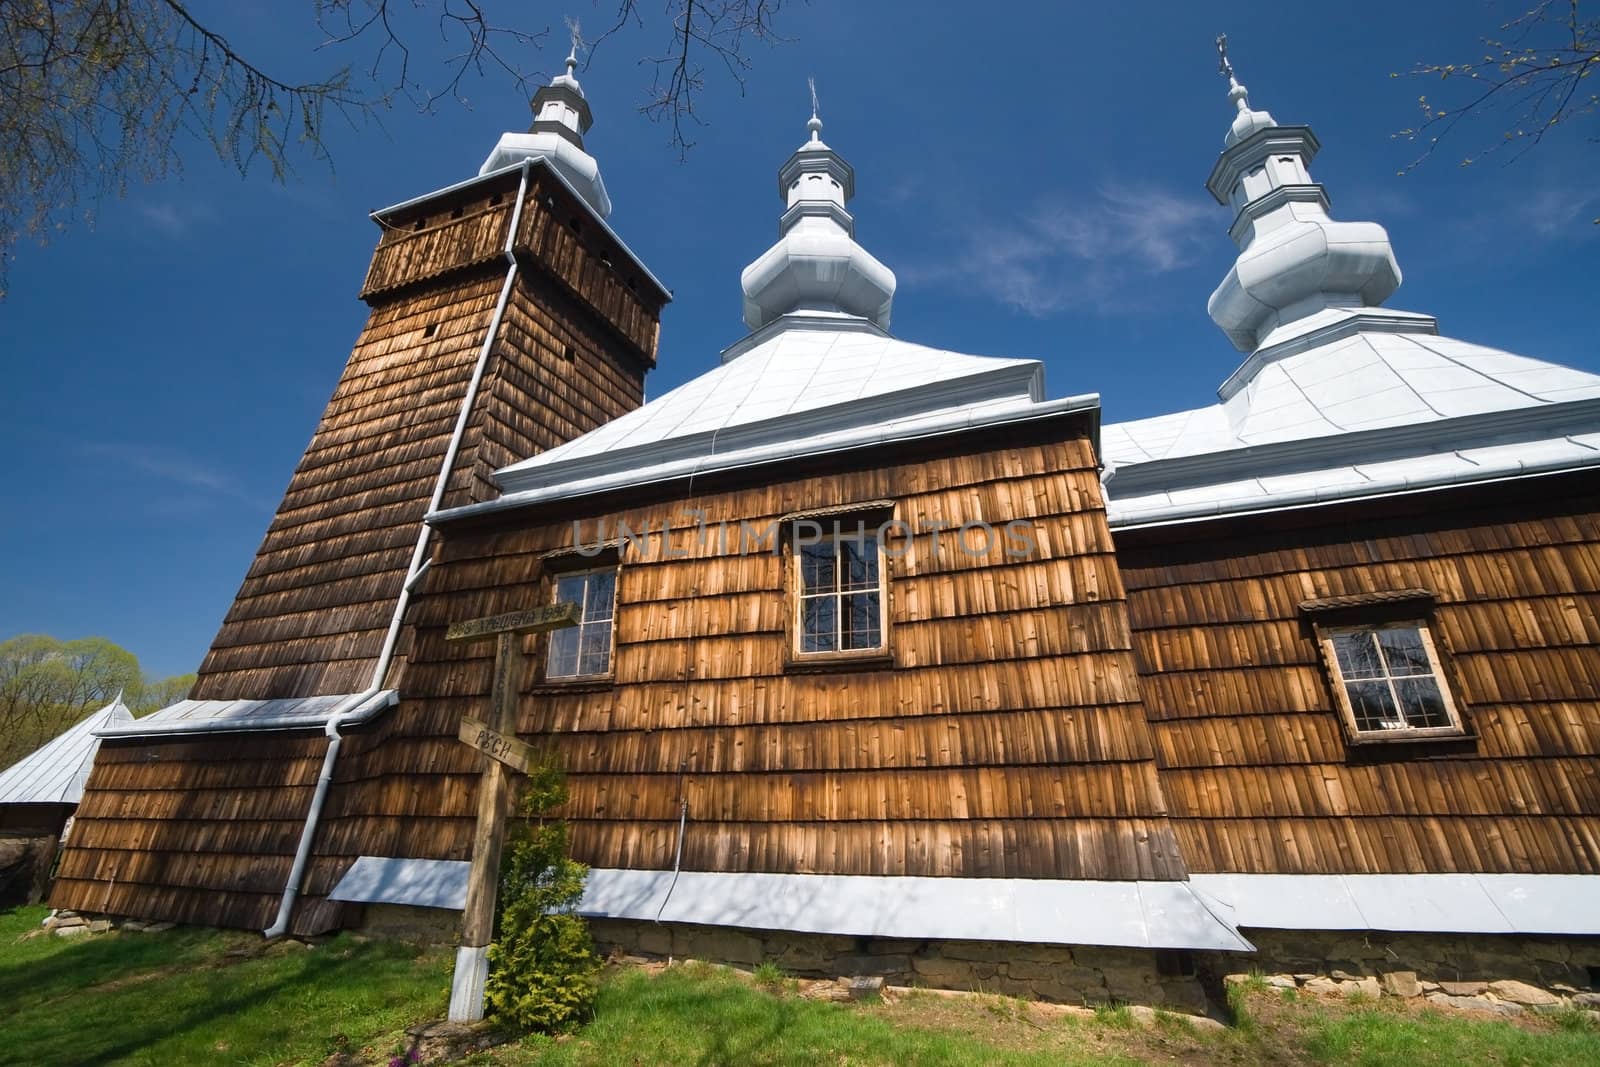 Wooden Orthodox Church, Poland by victoo